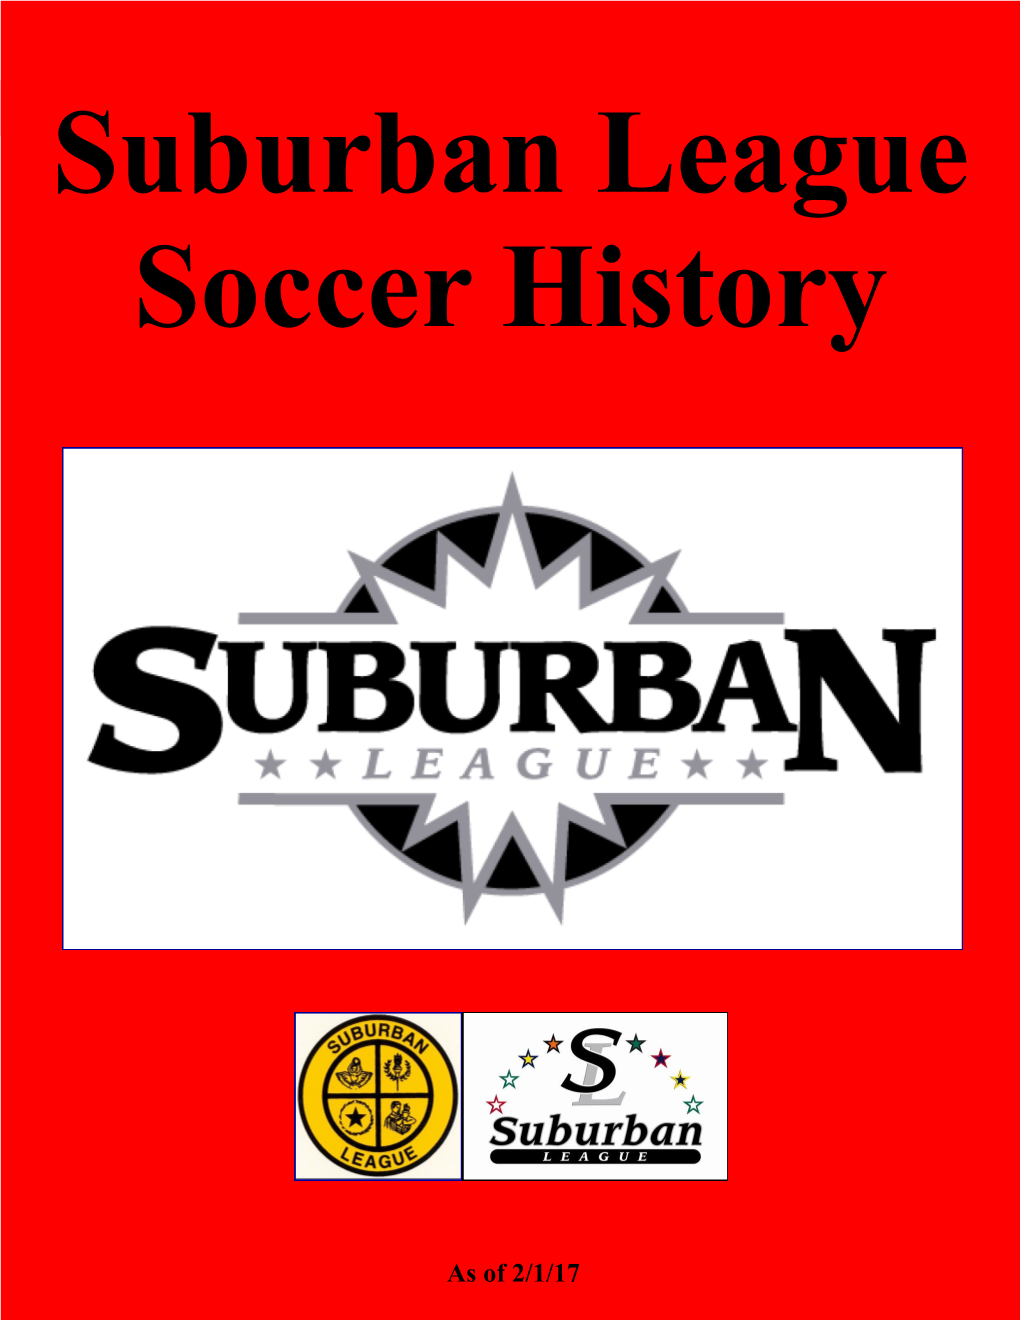 As of 2/1/17 the History of Suburban League Boys Soccer—National Division